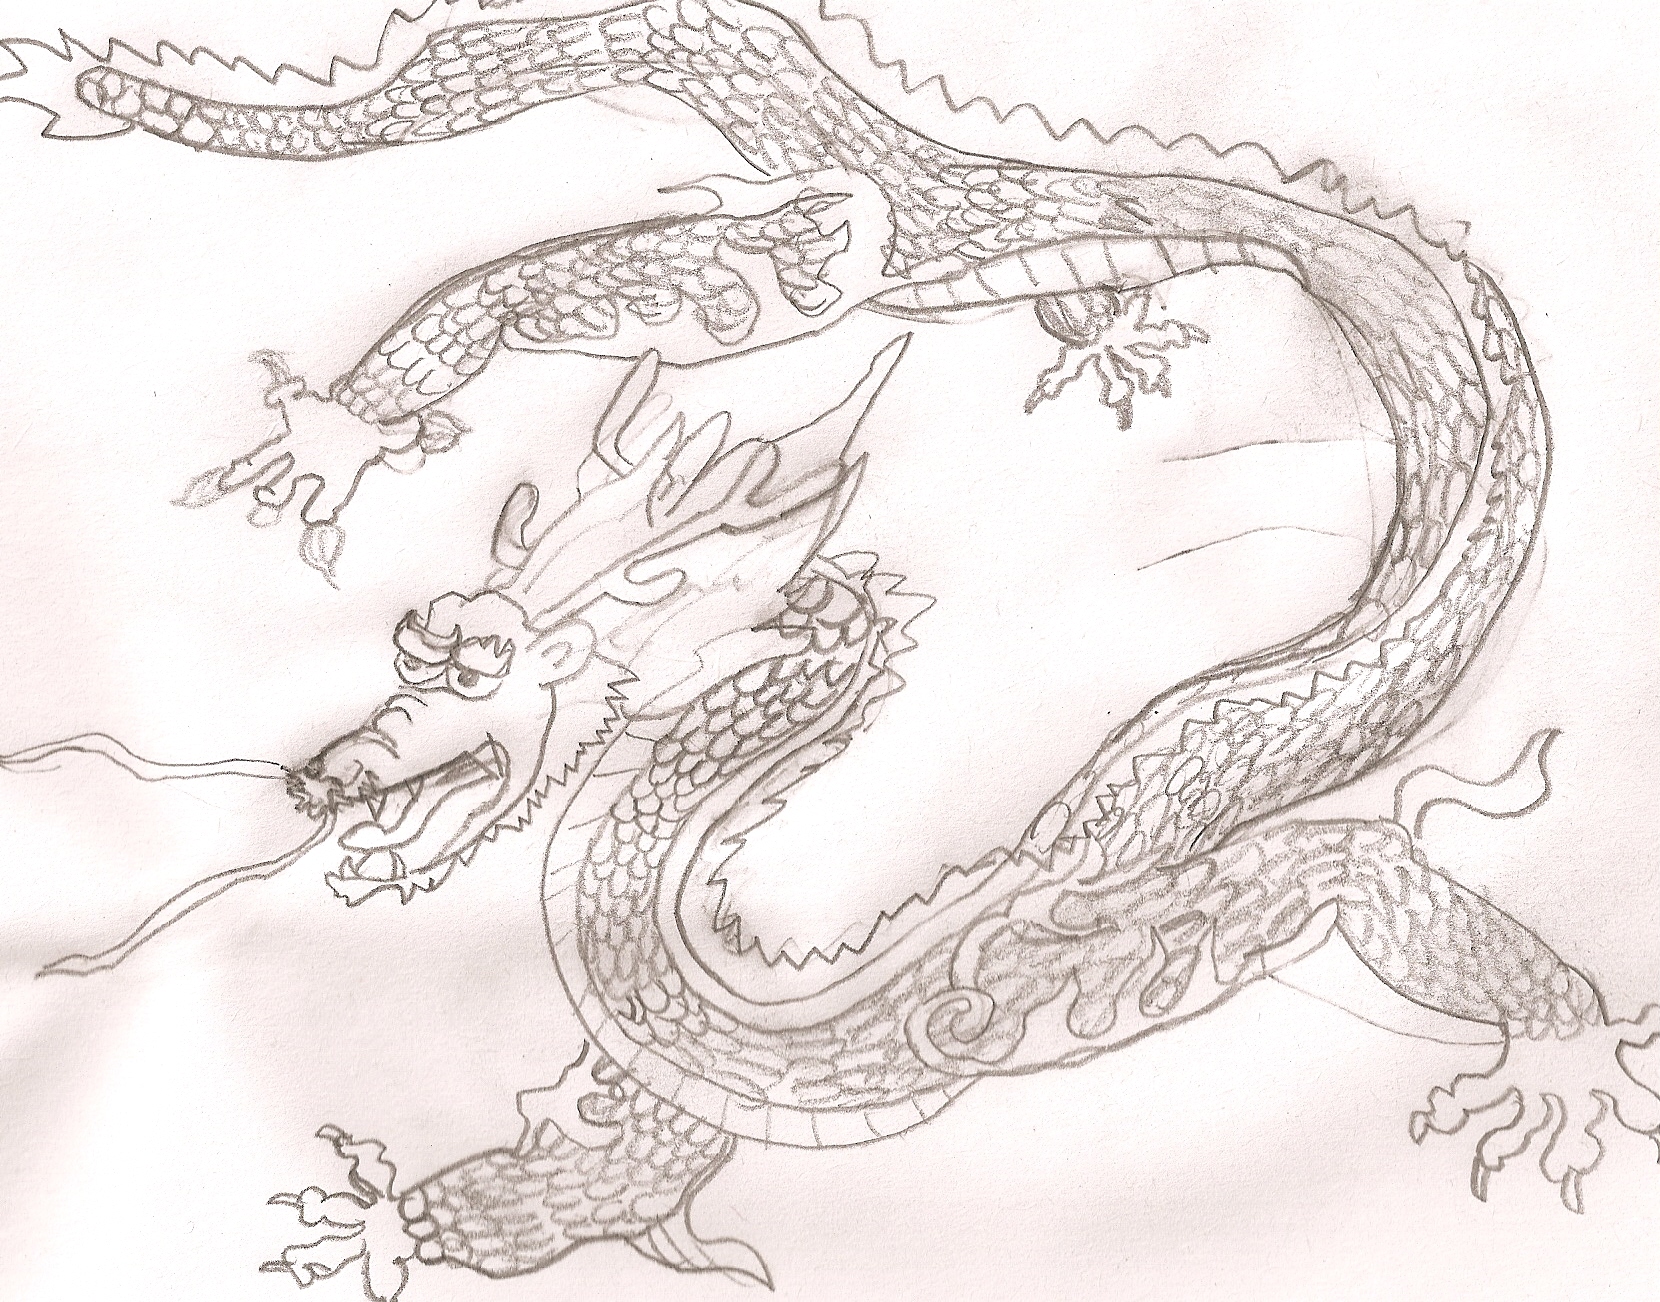 Chinese Dragon by 117masterchief